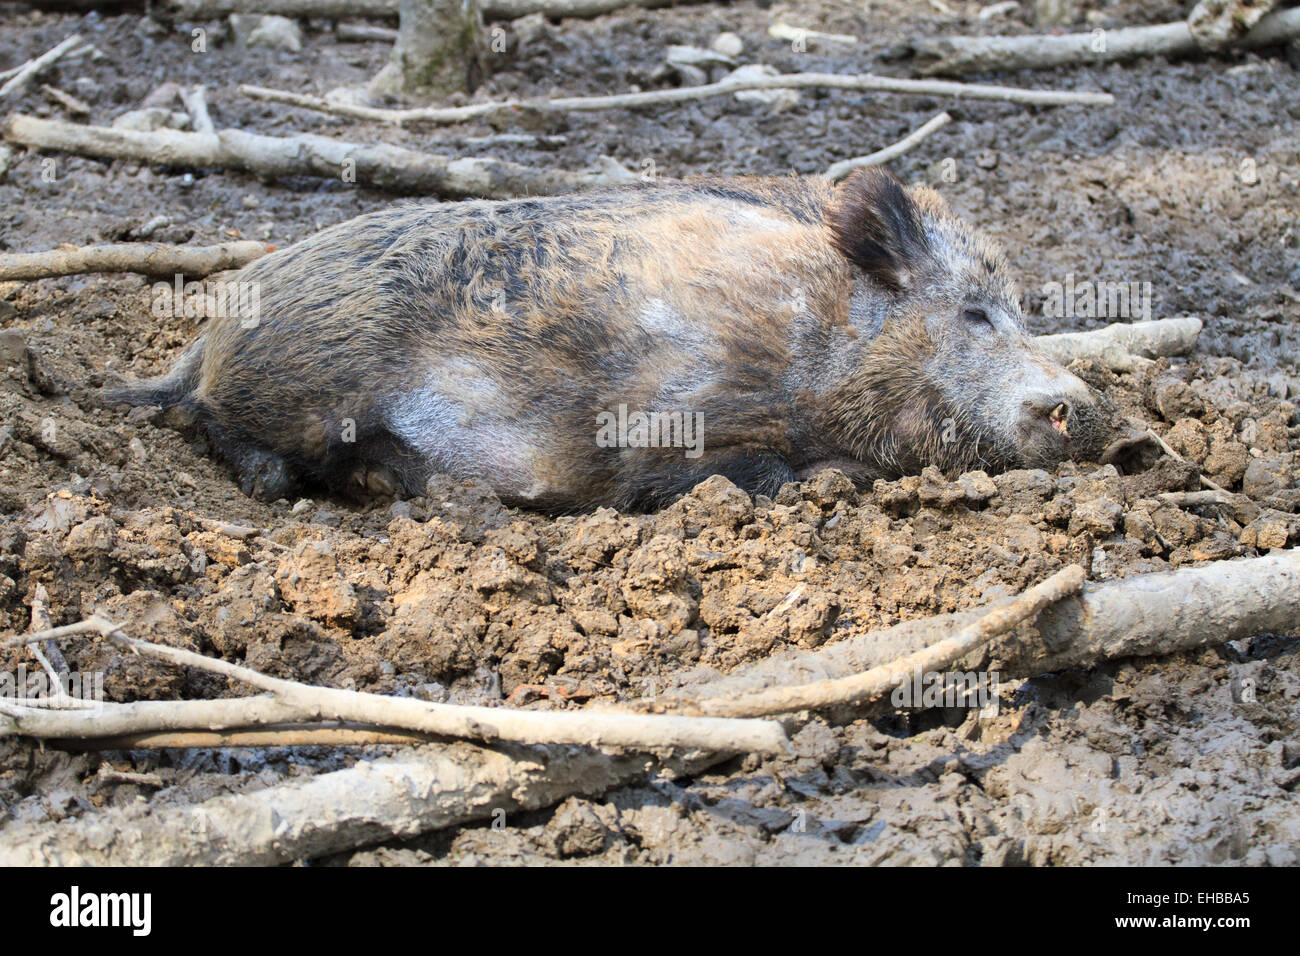 Boar resting in the mud Stock Photo